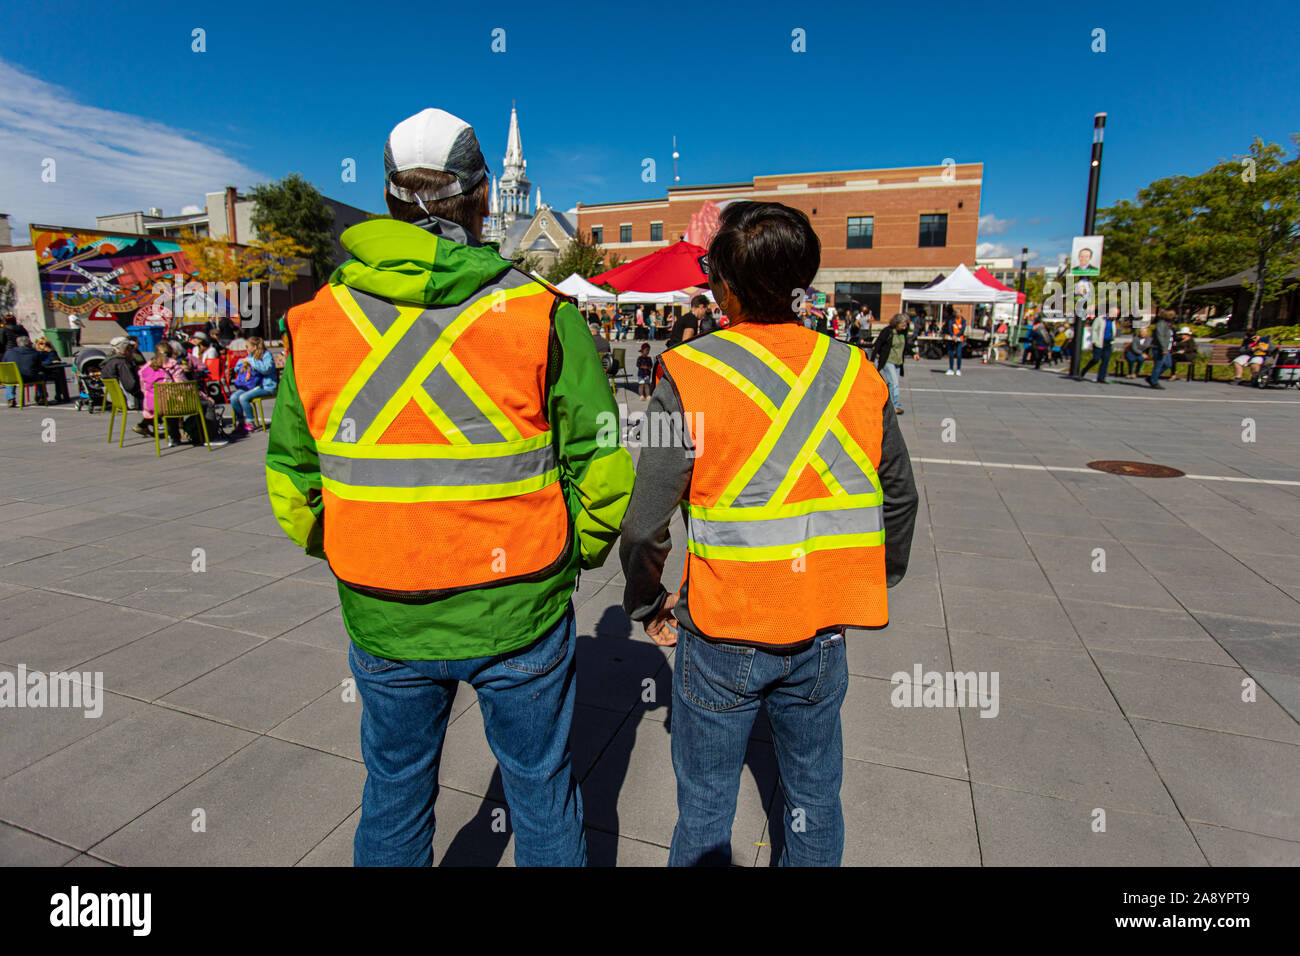 Two men from the back with high emergency clothing at public space protecting and looking out at climate change protest.  Stock Photo